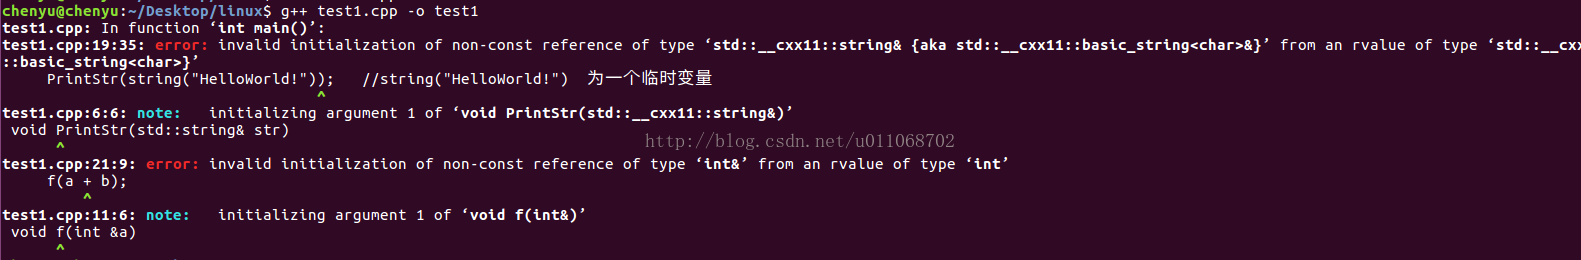 C++之invalid initialization of non-const reference of type ‘int’ from an rvalue of type ‘int’